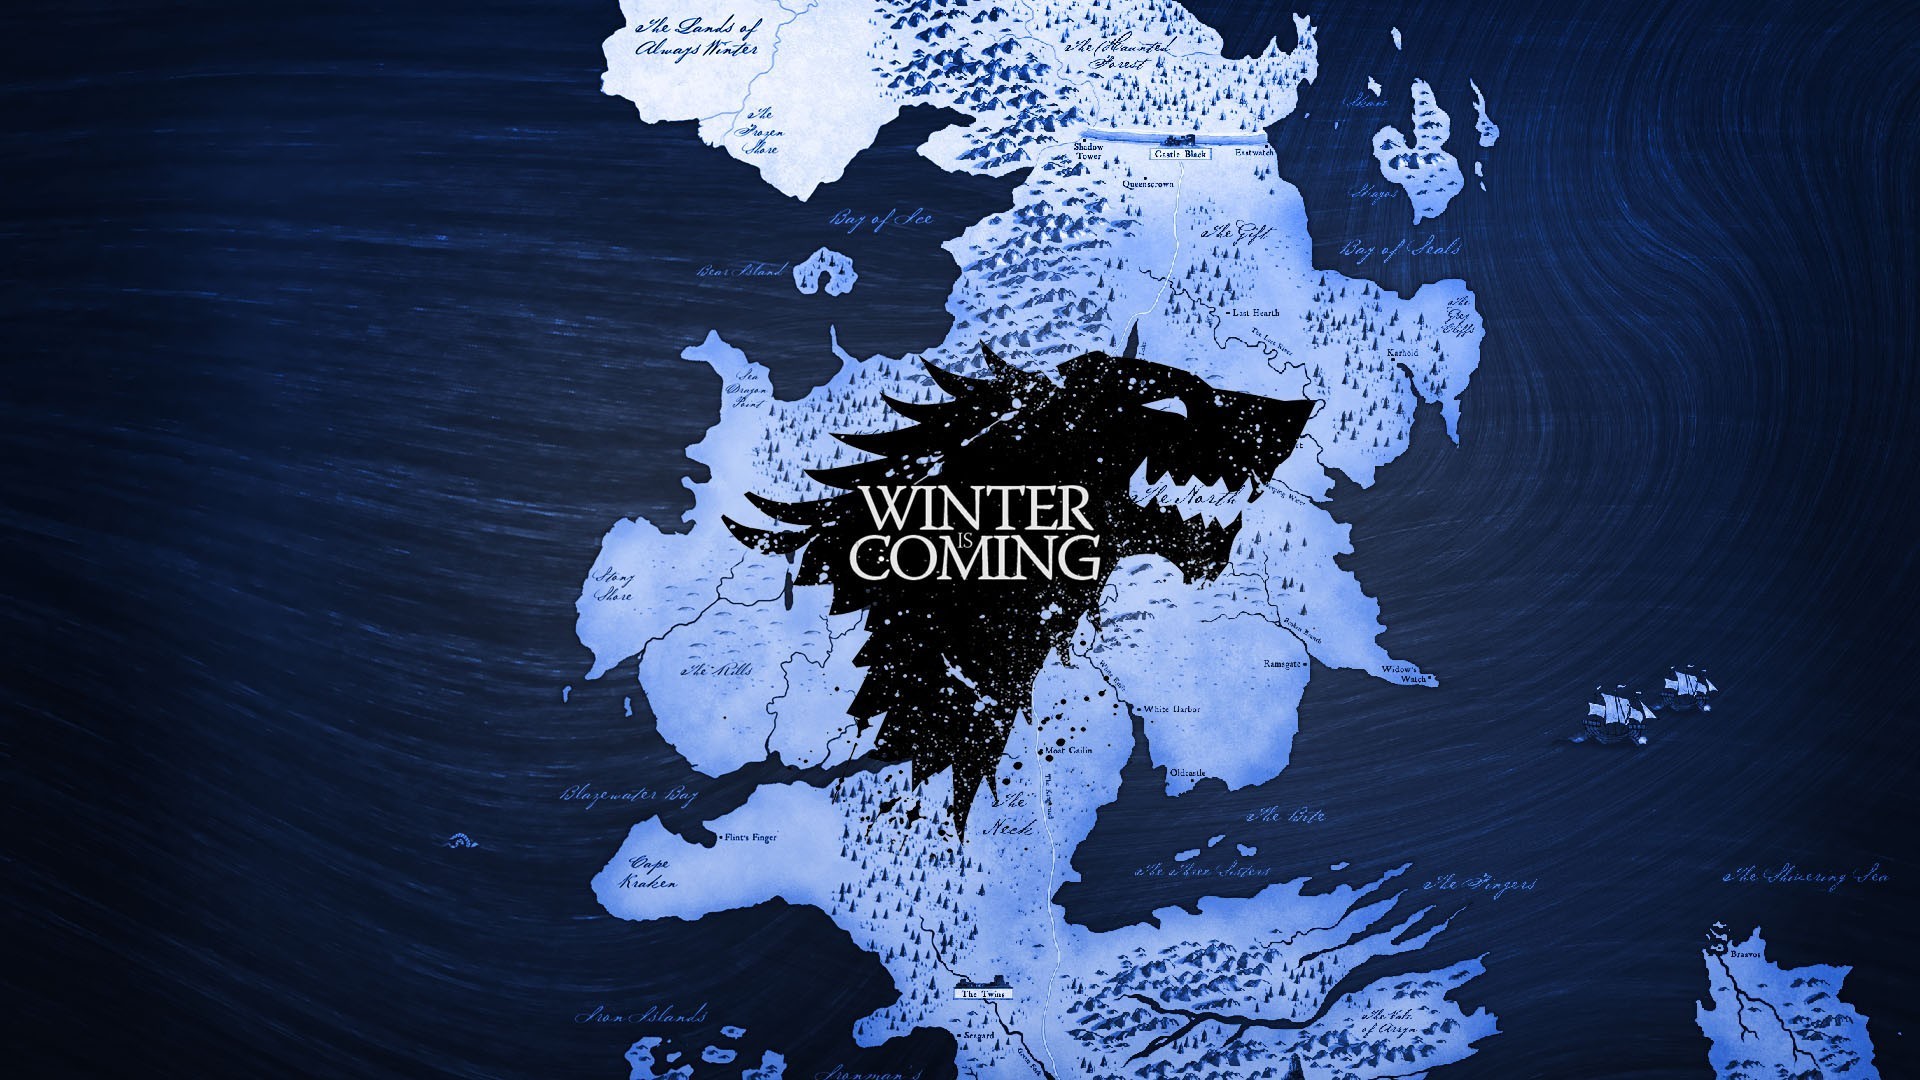 General Game of Thrones map Westeros Winterfell A Song of Ice and  Fire House Stark